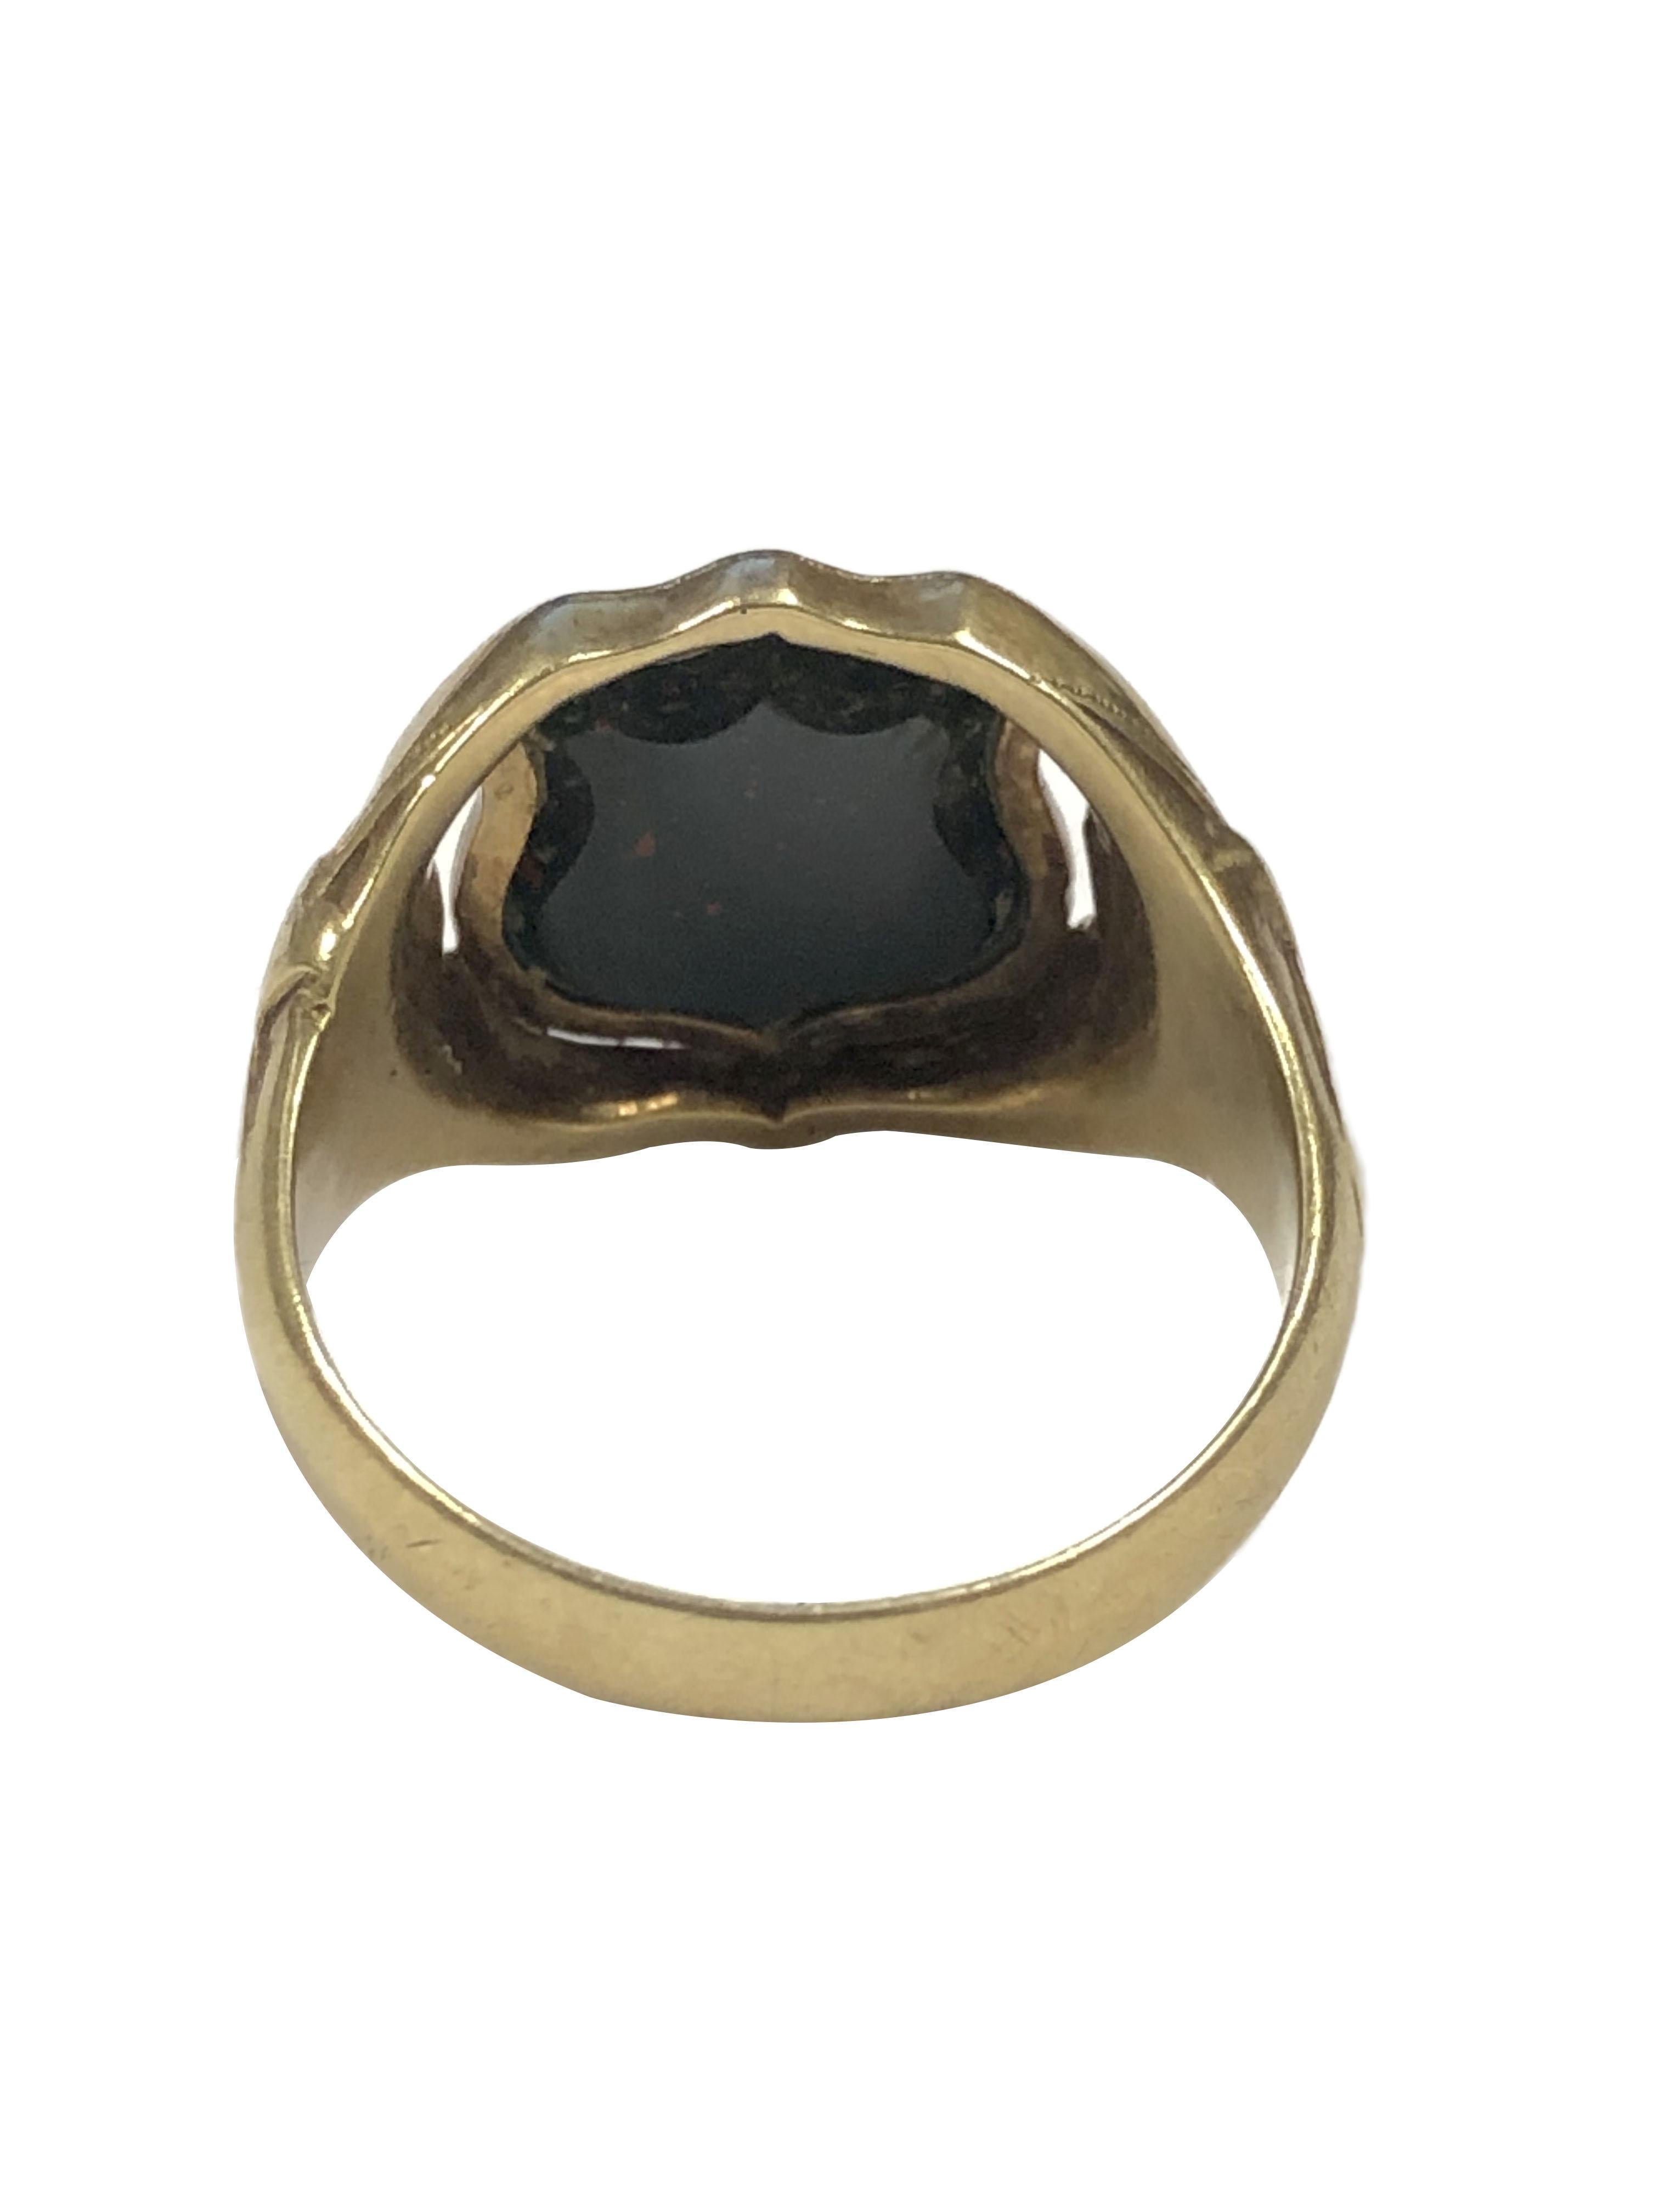 Antique Gold and Blood Stone Signet Ring In Good Condition For Sale In Chicago, IL